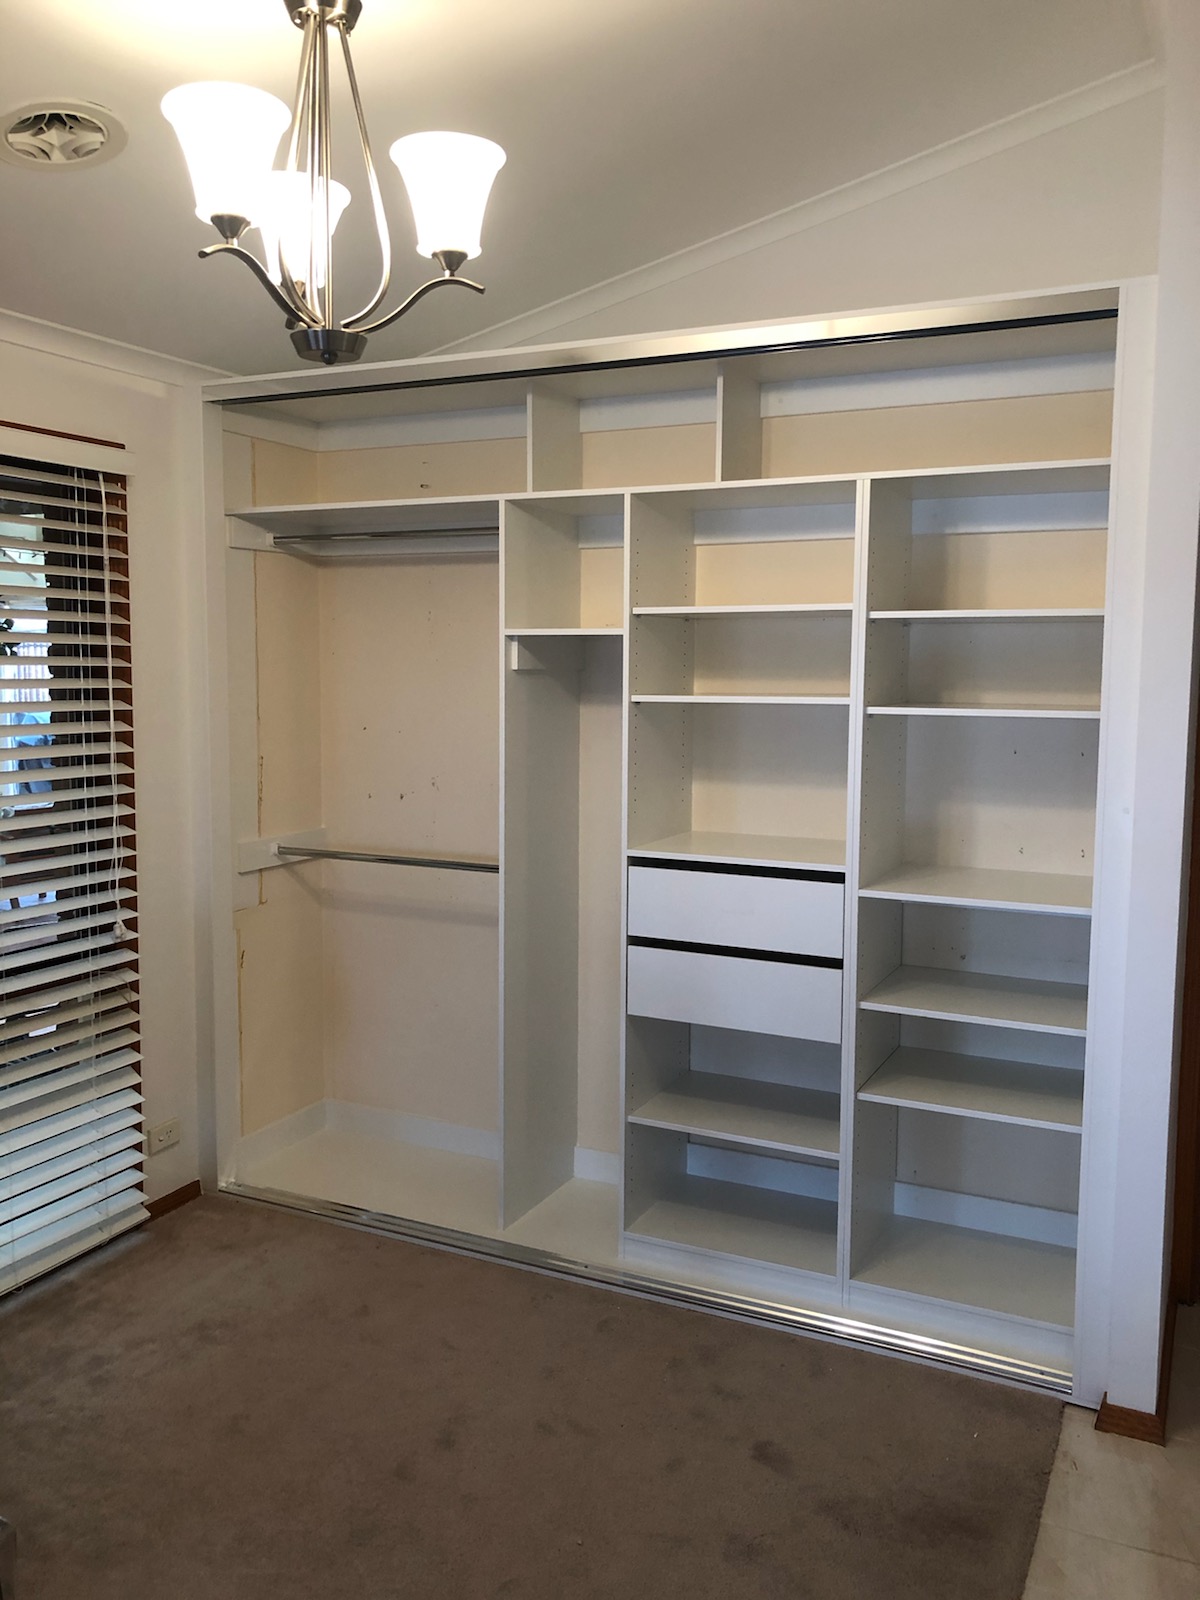 built in wardrobe in melbourne with shelving, hanging space and drawers